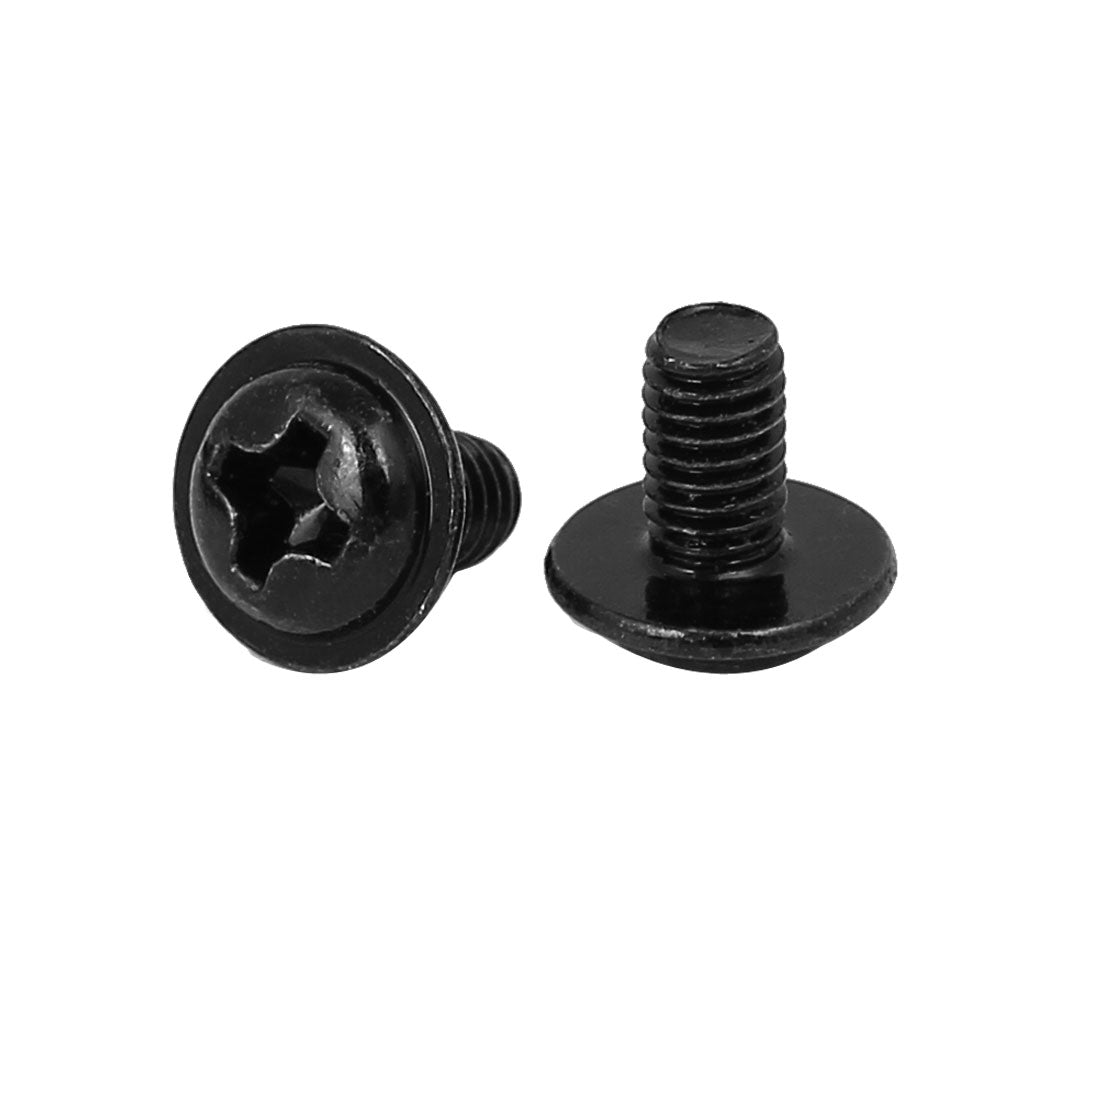 uxcell Uxcell Computer PC Case Phillips Washer Motherboard Screw Black PWM3 x 5mm 200pcs